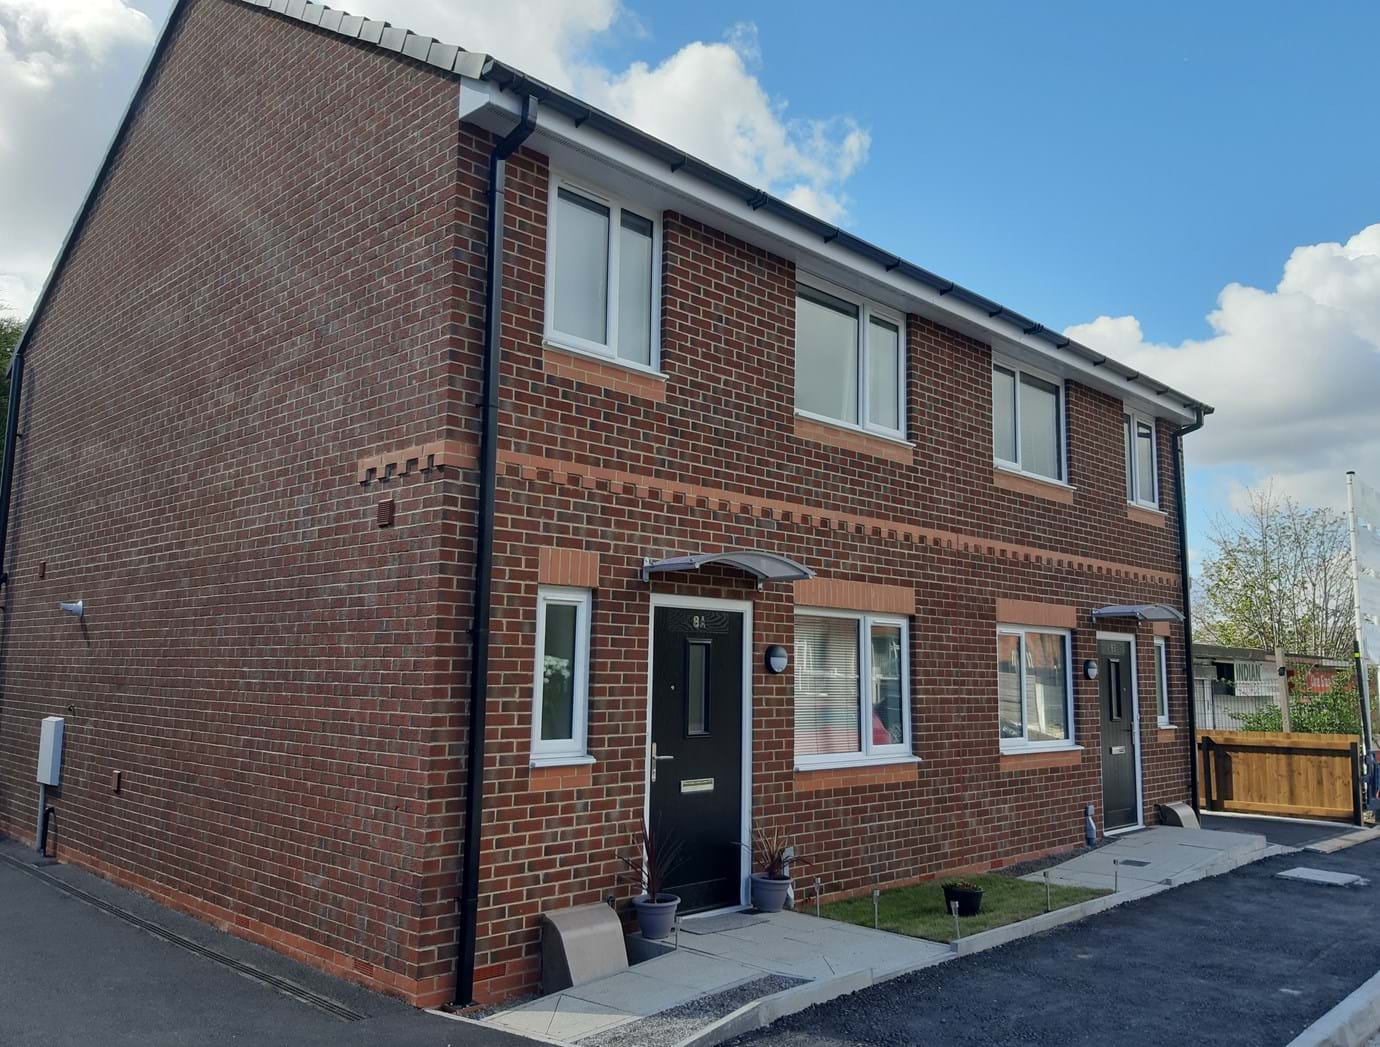 Our Royley development has transformed vacant land in Royton and brought 15 family homes for affordable rent to the area.